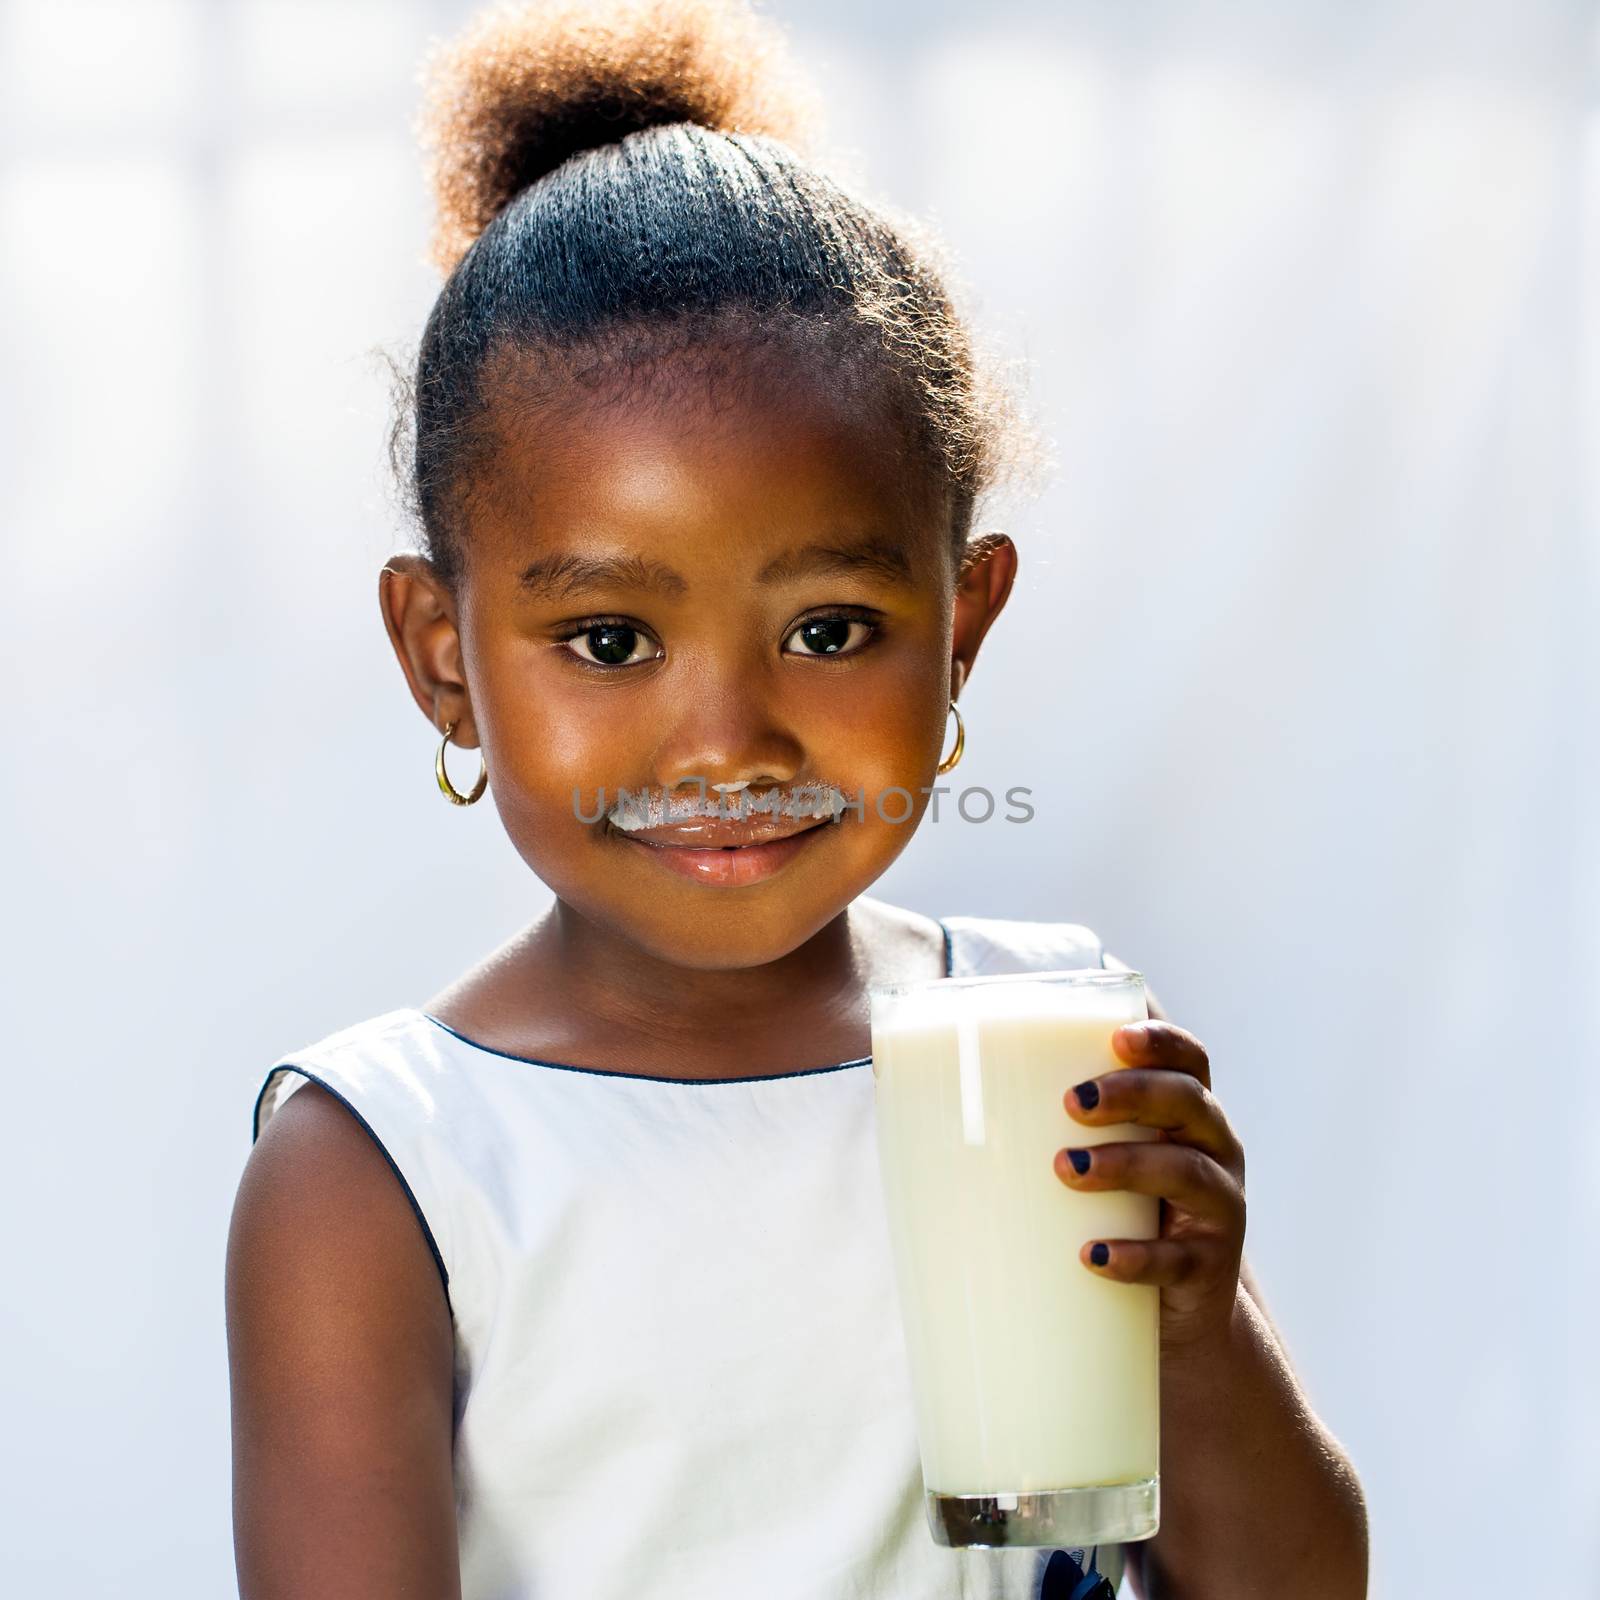 Close up portrait of adorable little African girl drinking glass of milk.Isolated against light background.